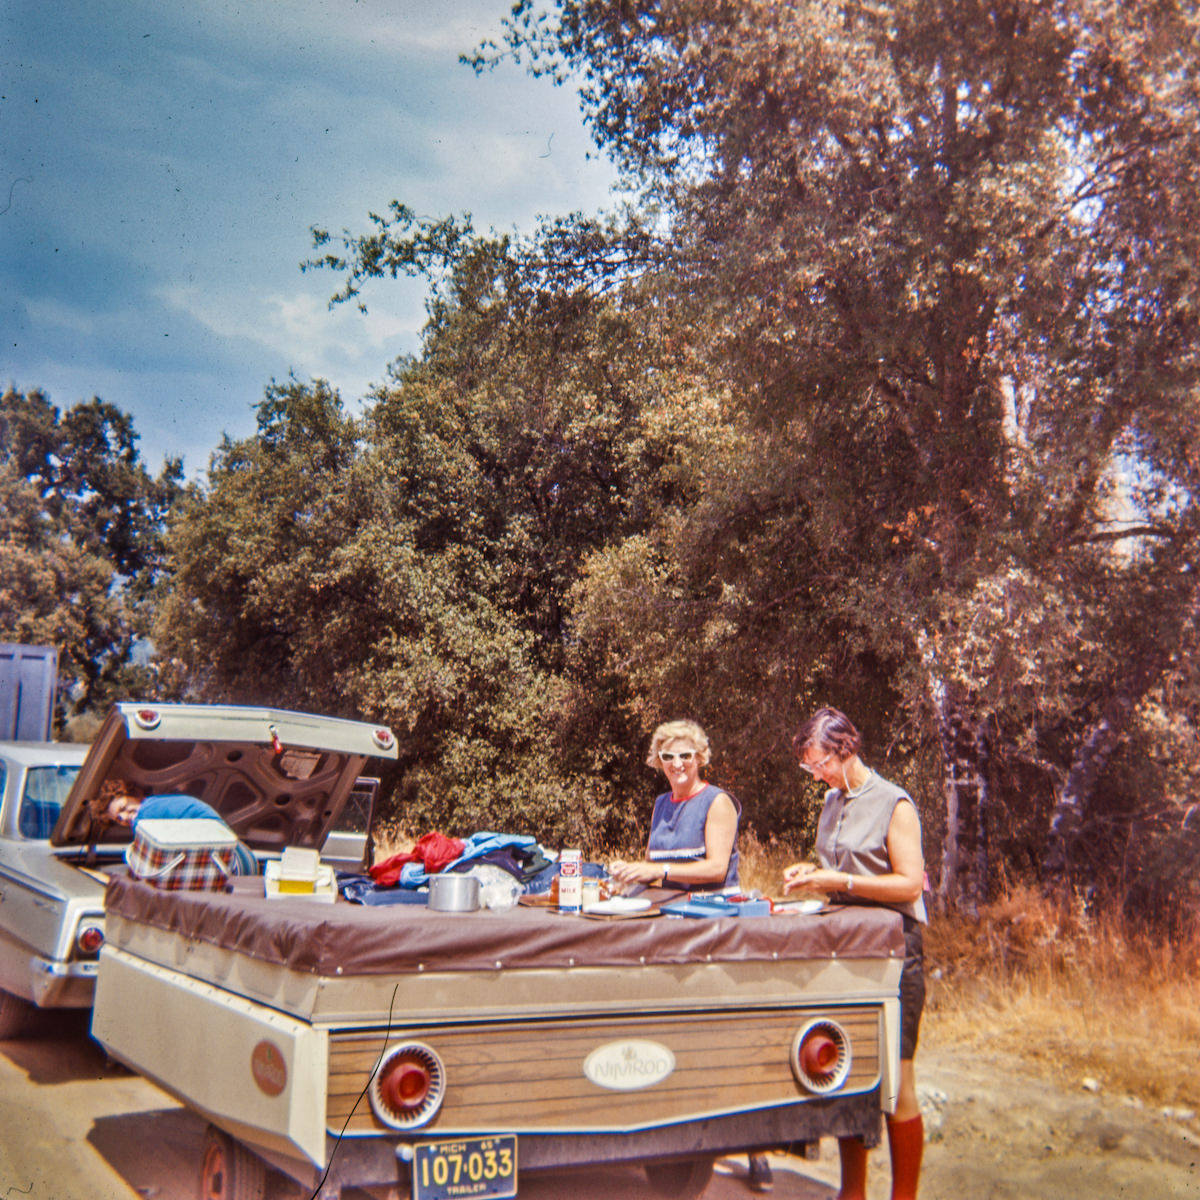 Lunch en route, Sequoia to Yosemite – August 1965